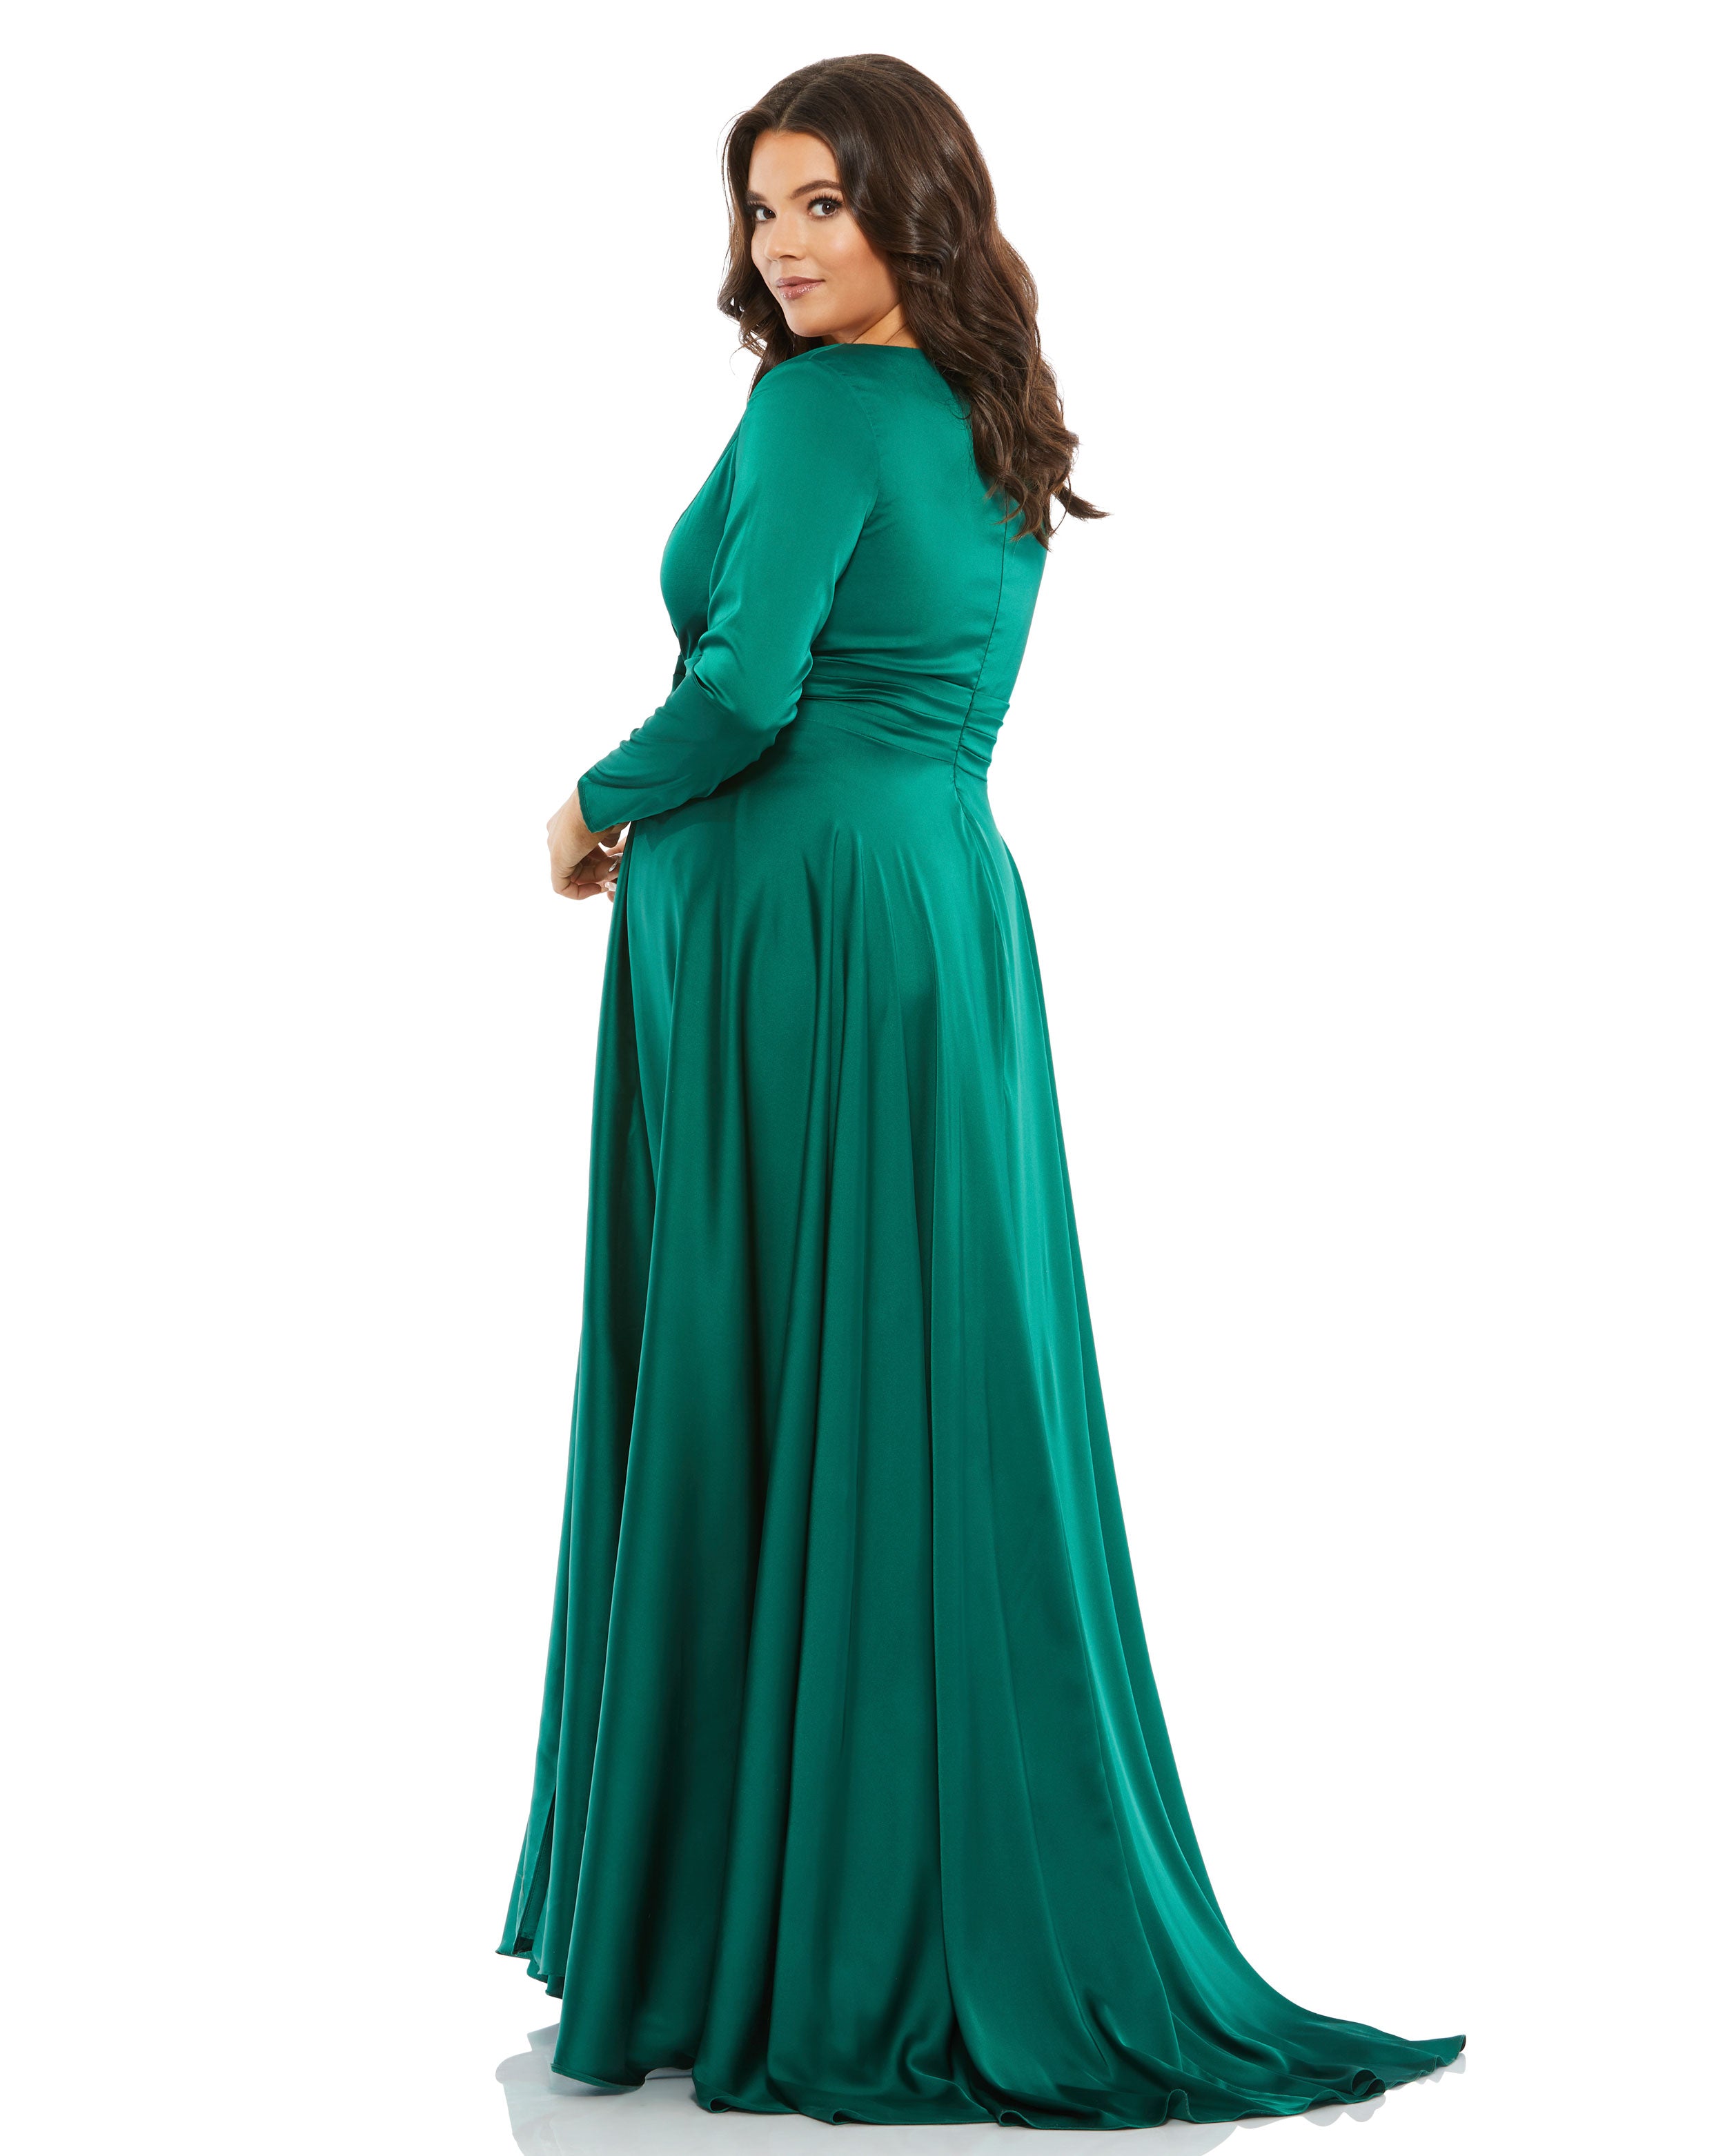 Classic Satin Long Sleeve Evening Gown (Plus) - FINAL SALE